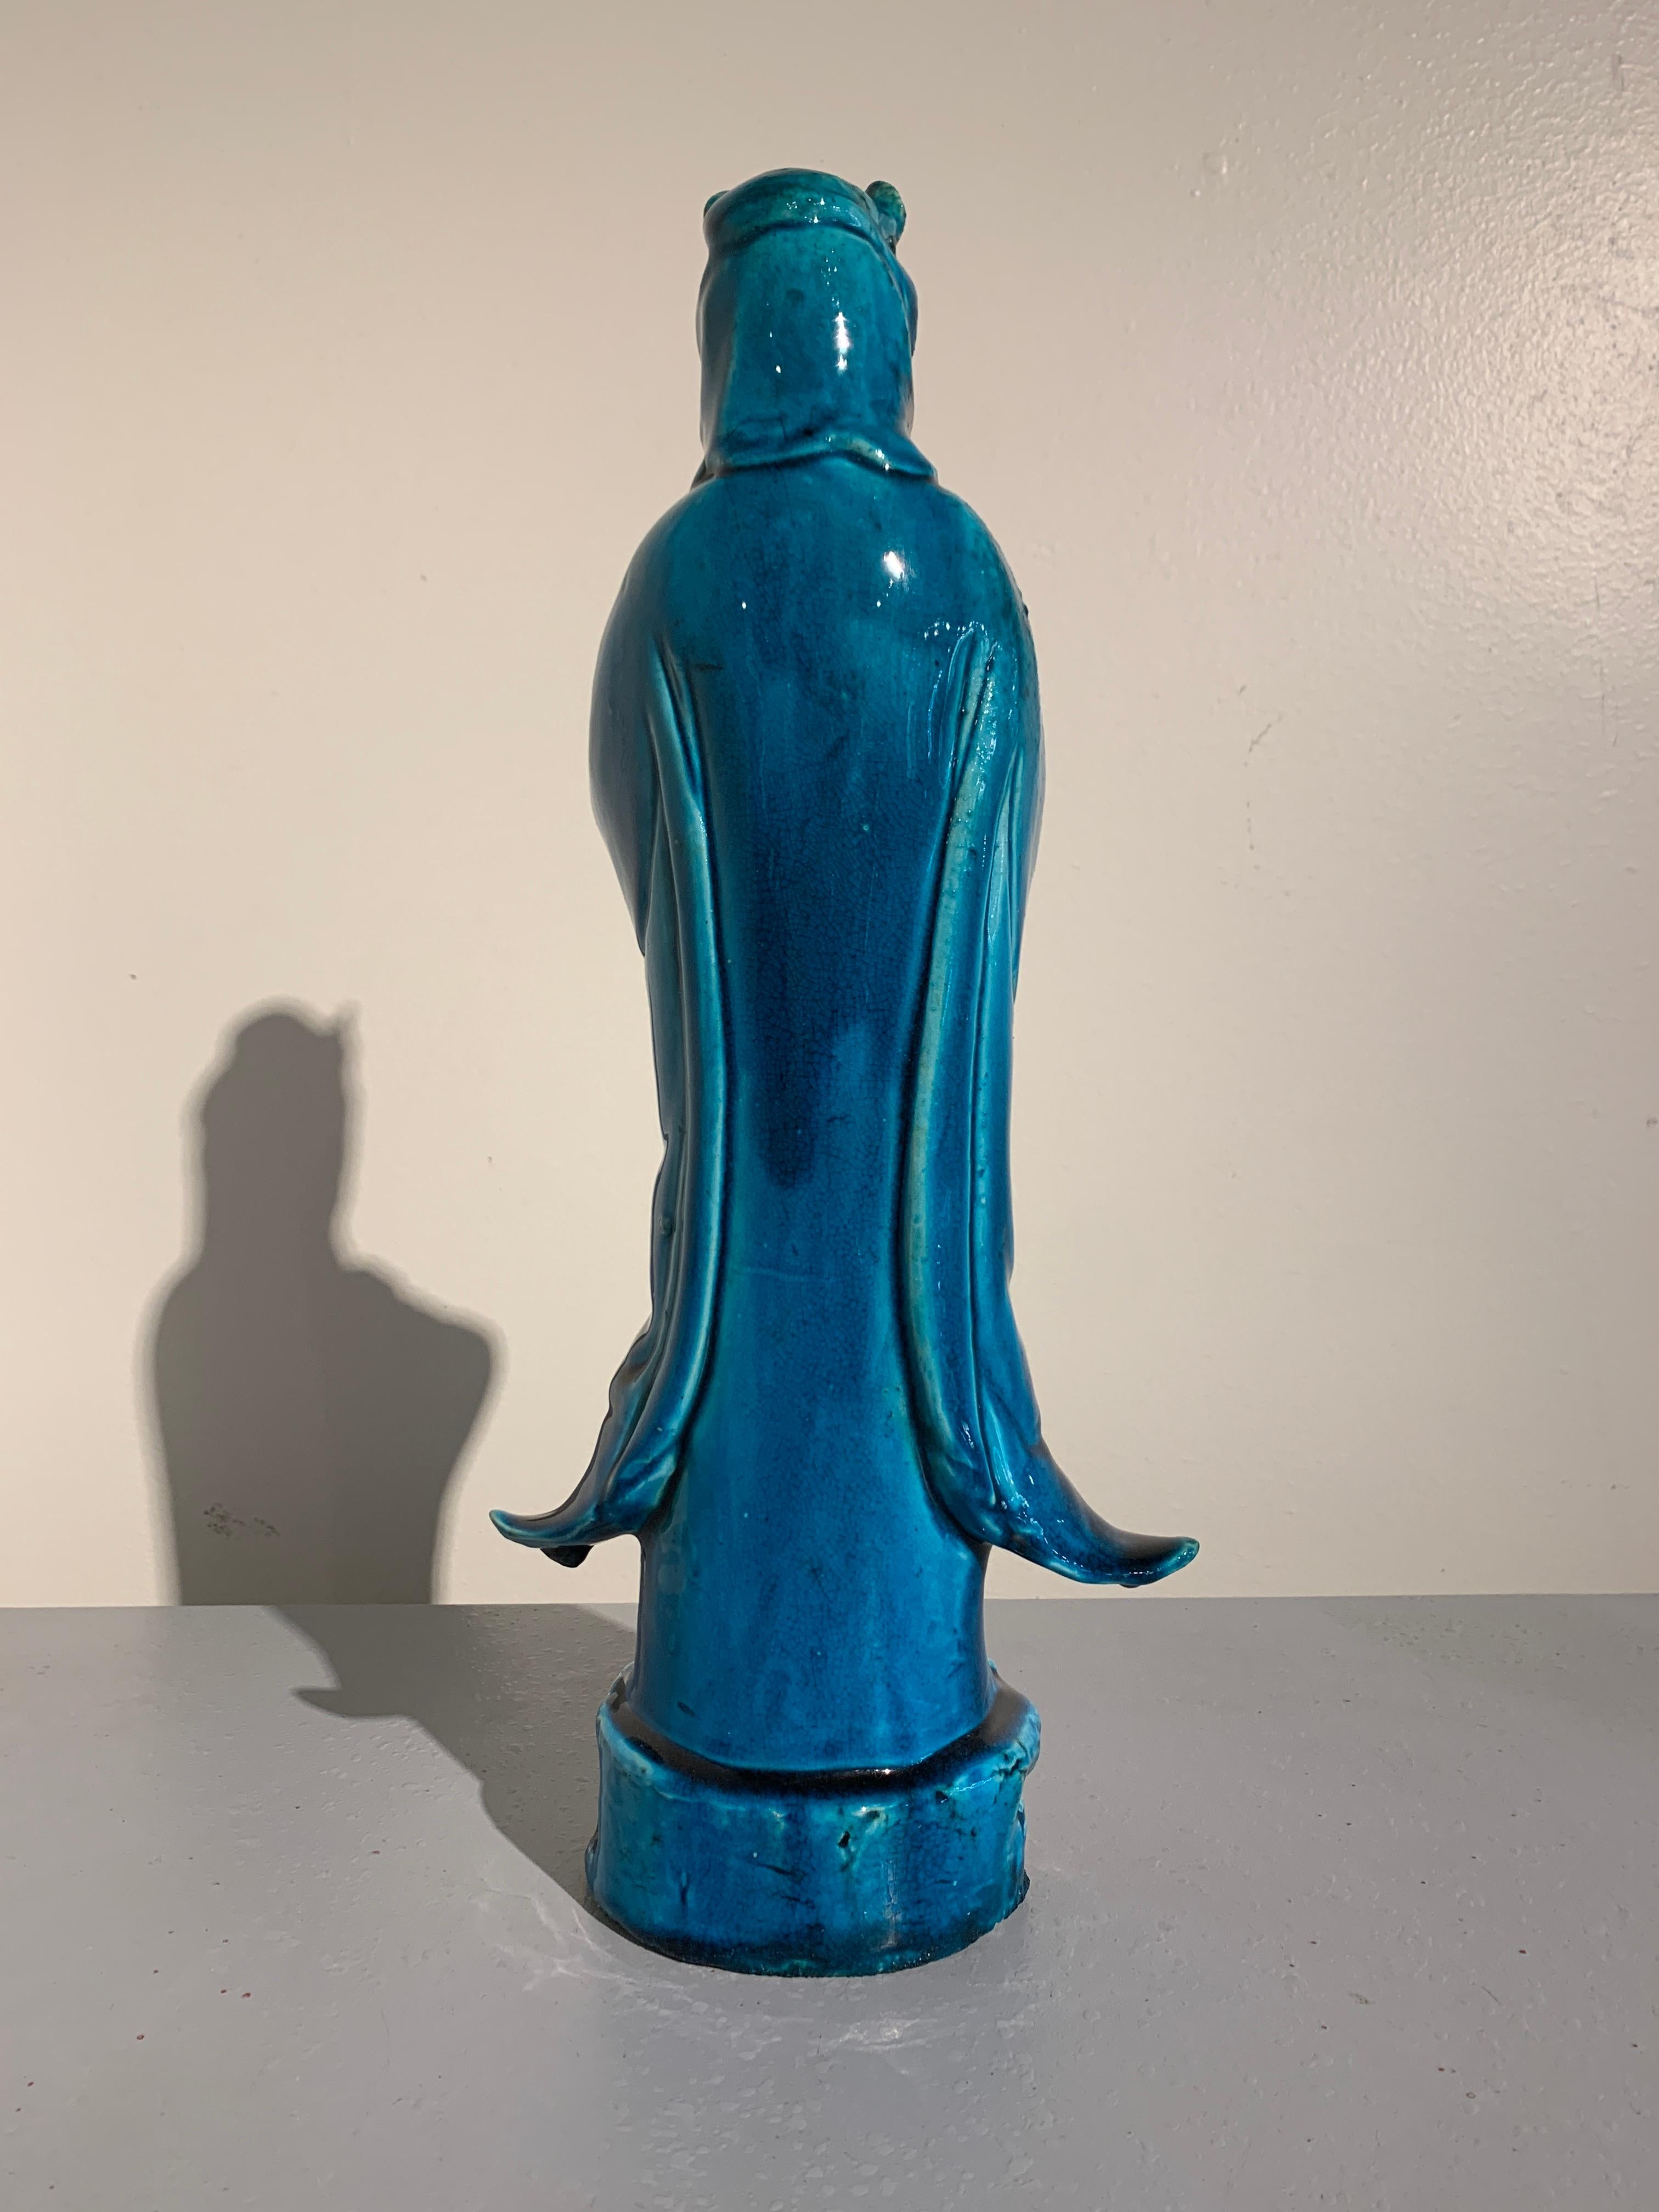 Porcelain Vintage Chinese Turquoise Glazed Guanyin Statue, Mid-20th Century, China